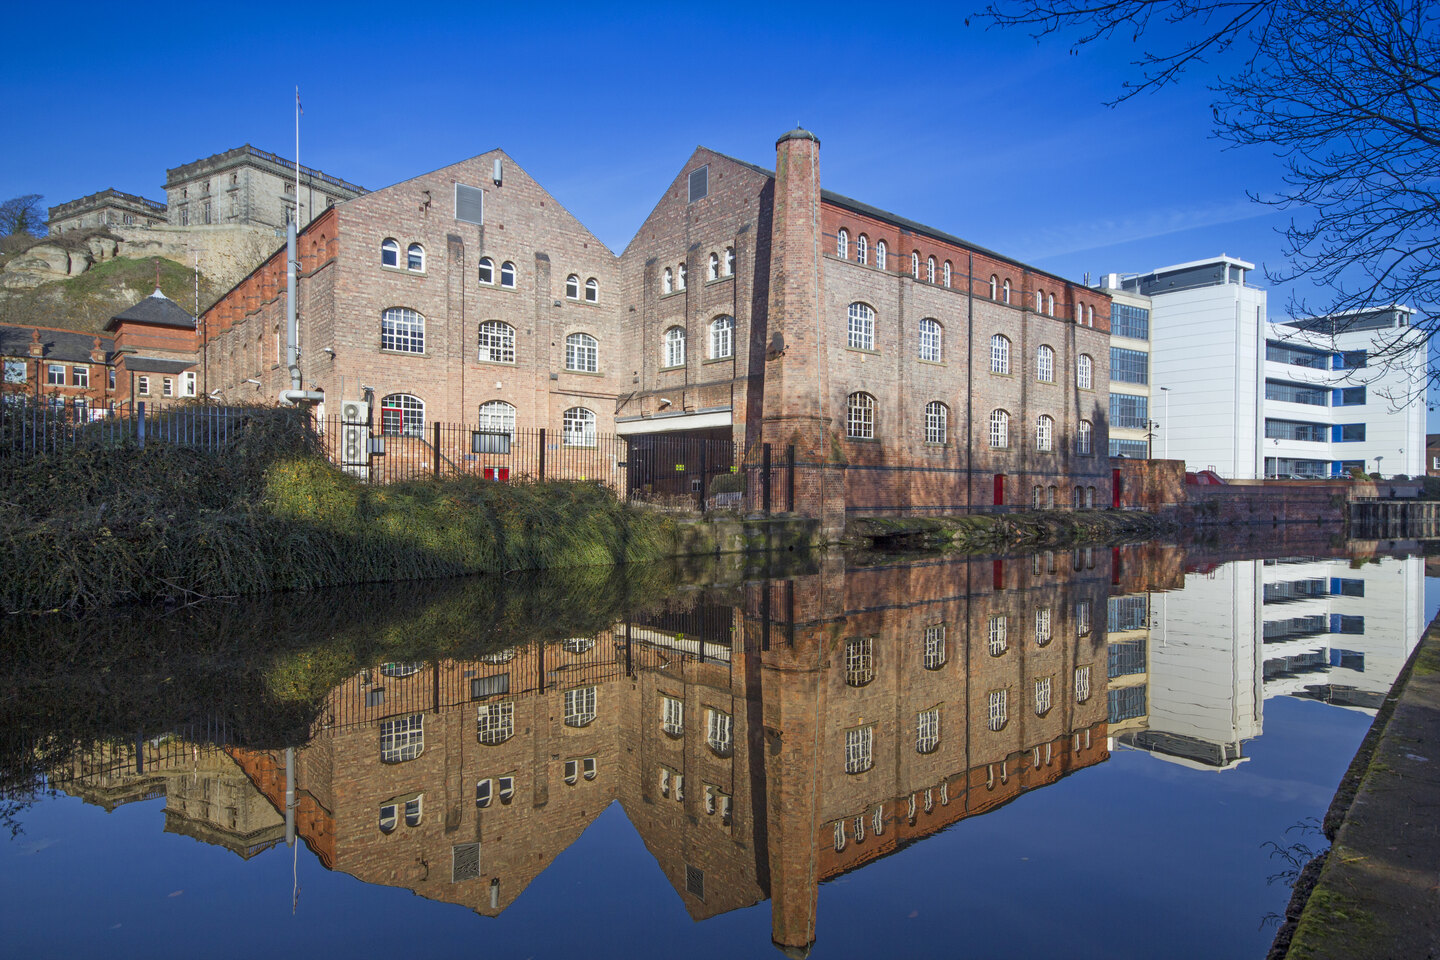 Student Accommodation in Beeston, Nottingham - A calm day by Castle Wharf canalside with Nottingham Castle in the background